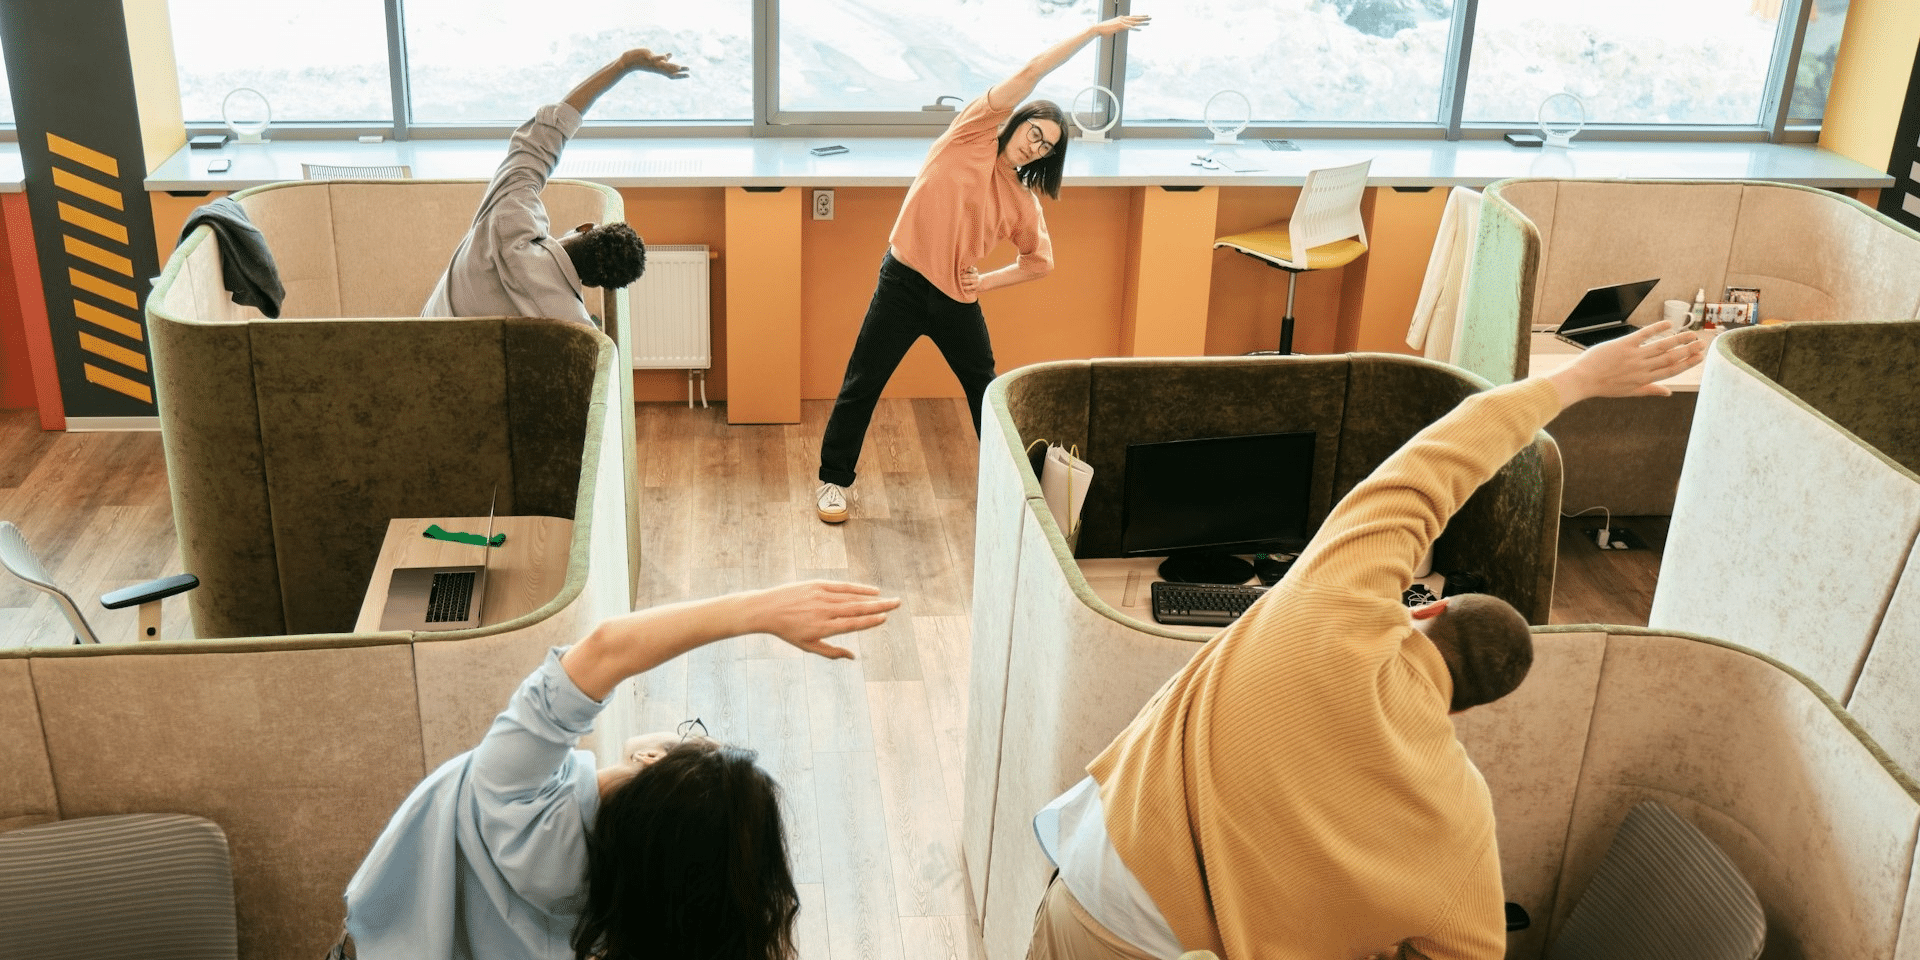 The Rise of Morning Exercises in Offices: A Trend Worth Embracing